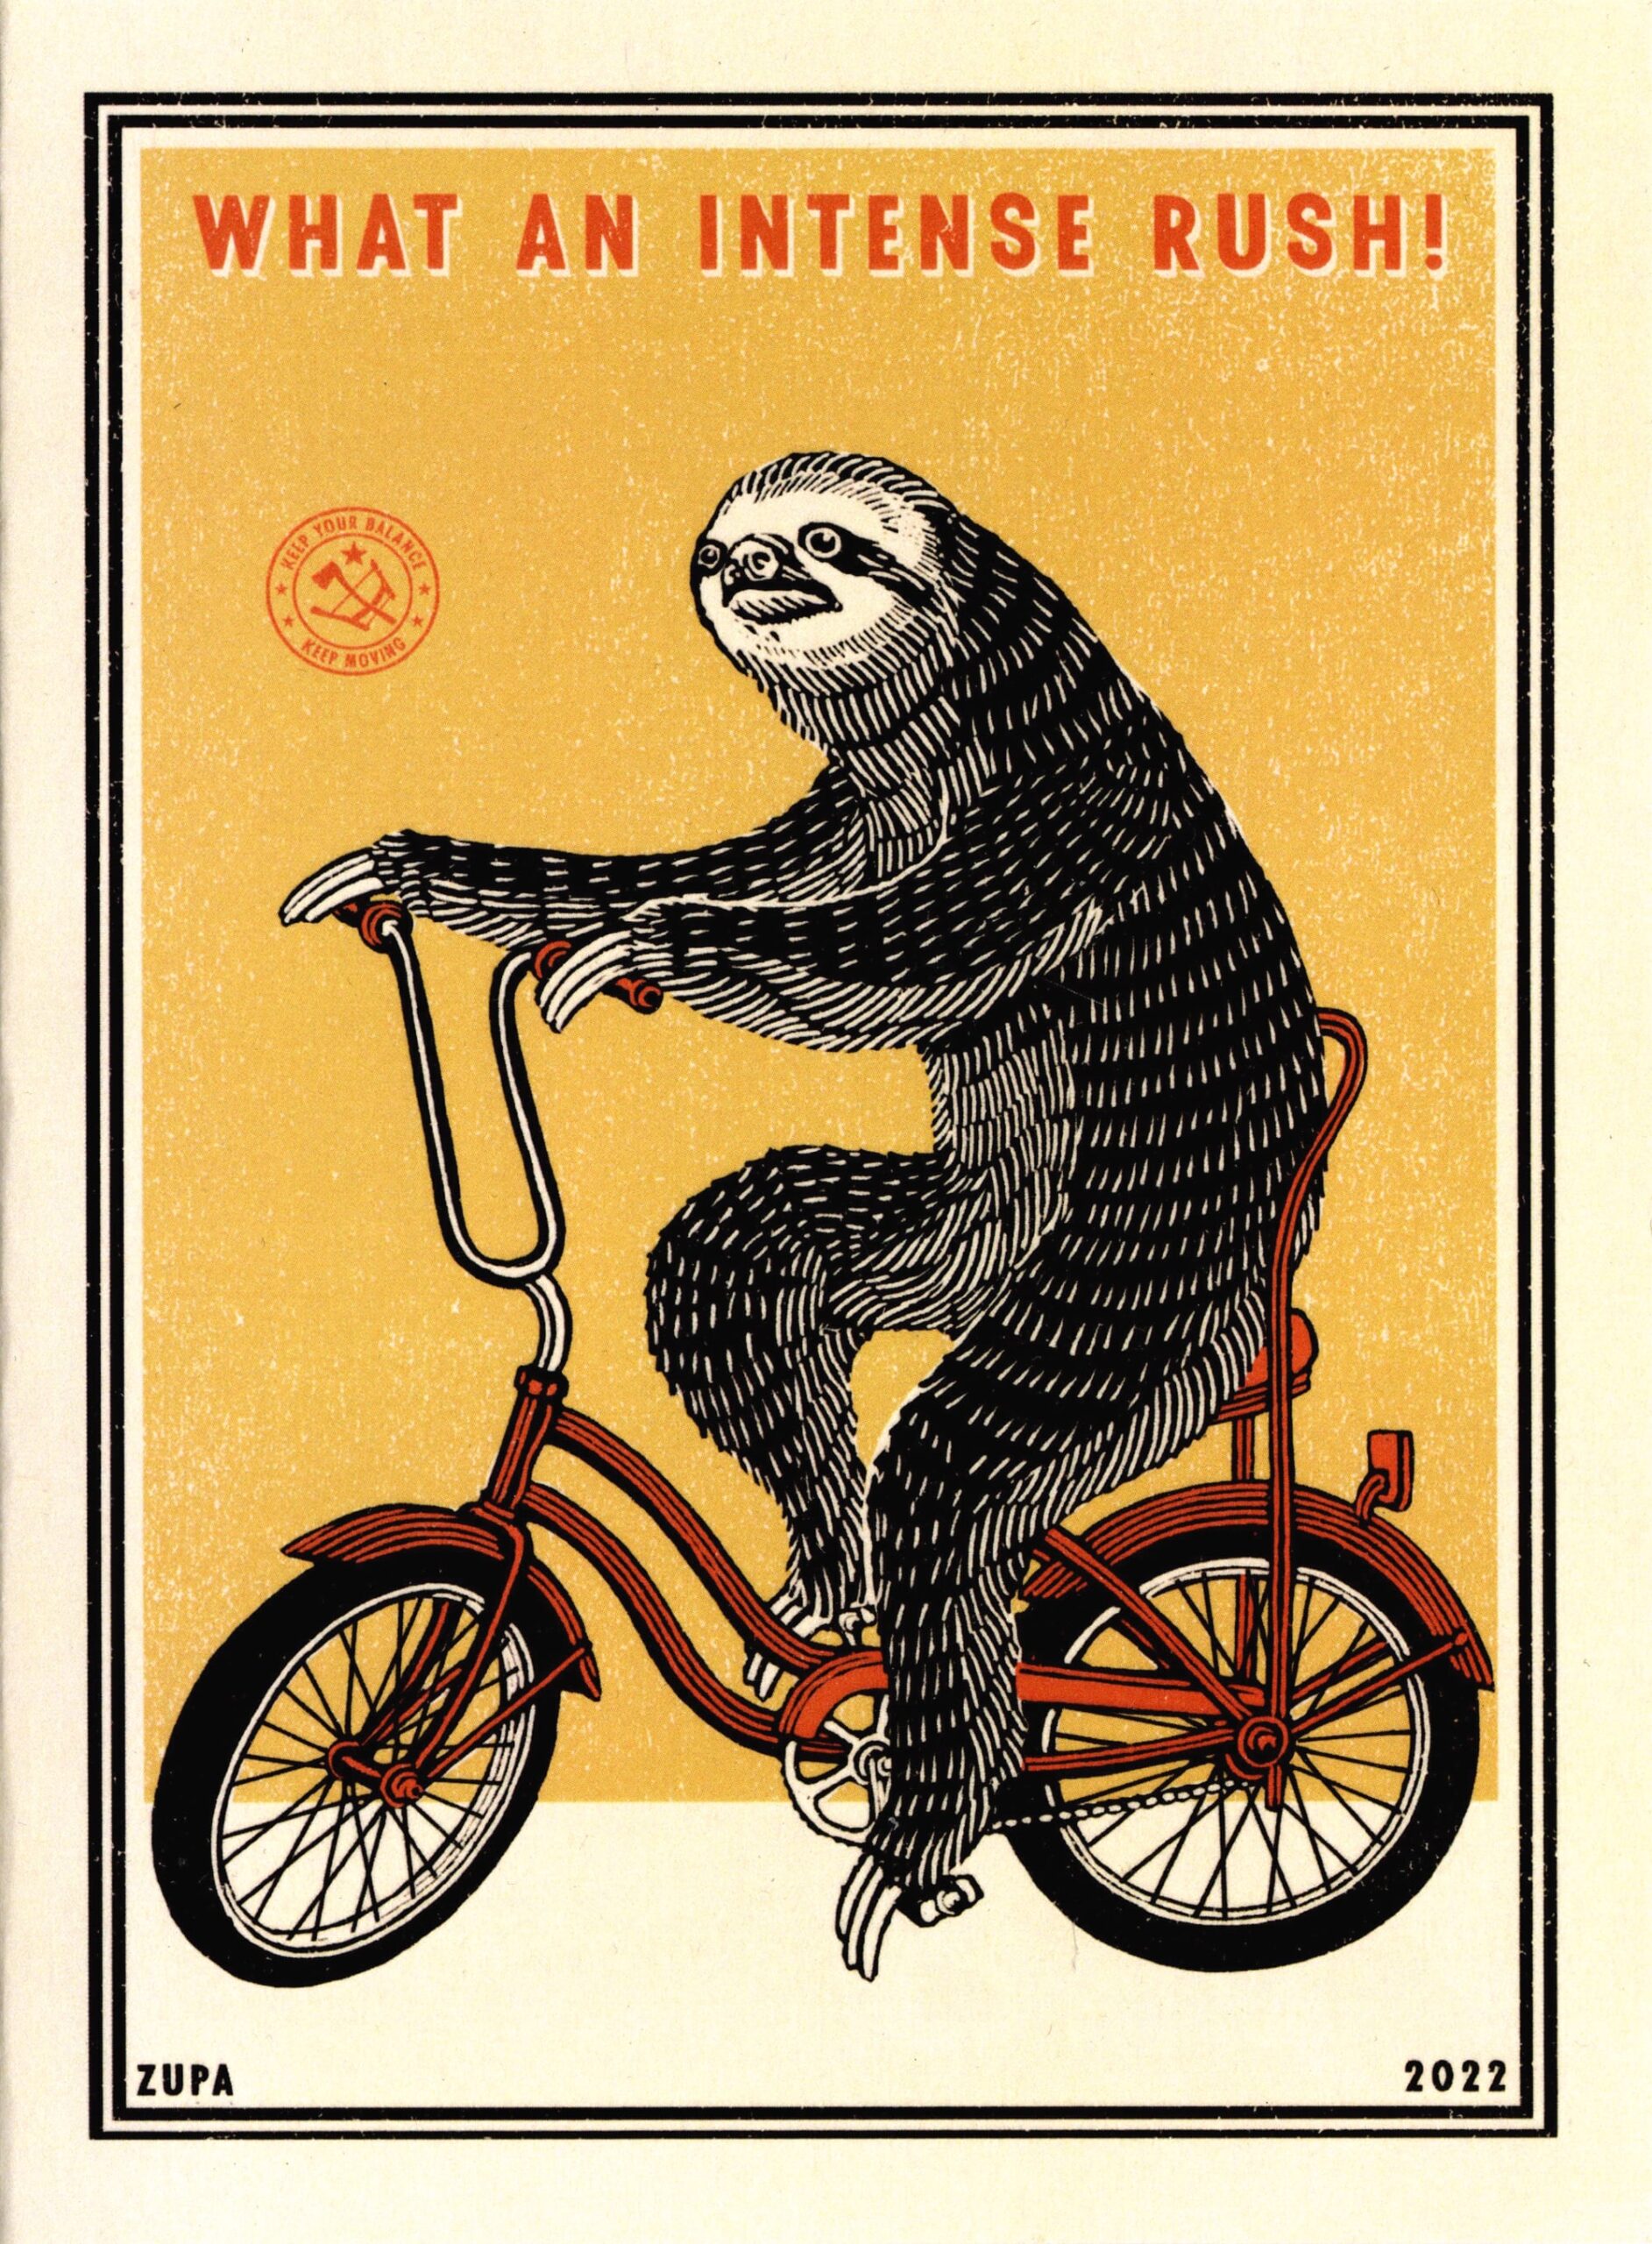 Debatable Motivations Inspire the Adventures of Biking Sloths and Raging Cats in Ravi Zupa’s Illustrations